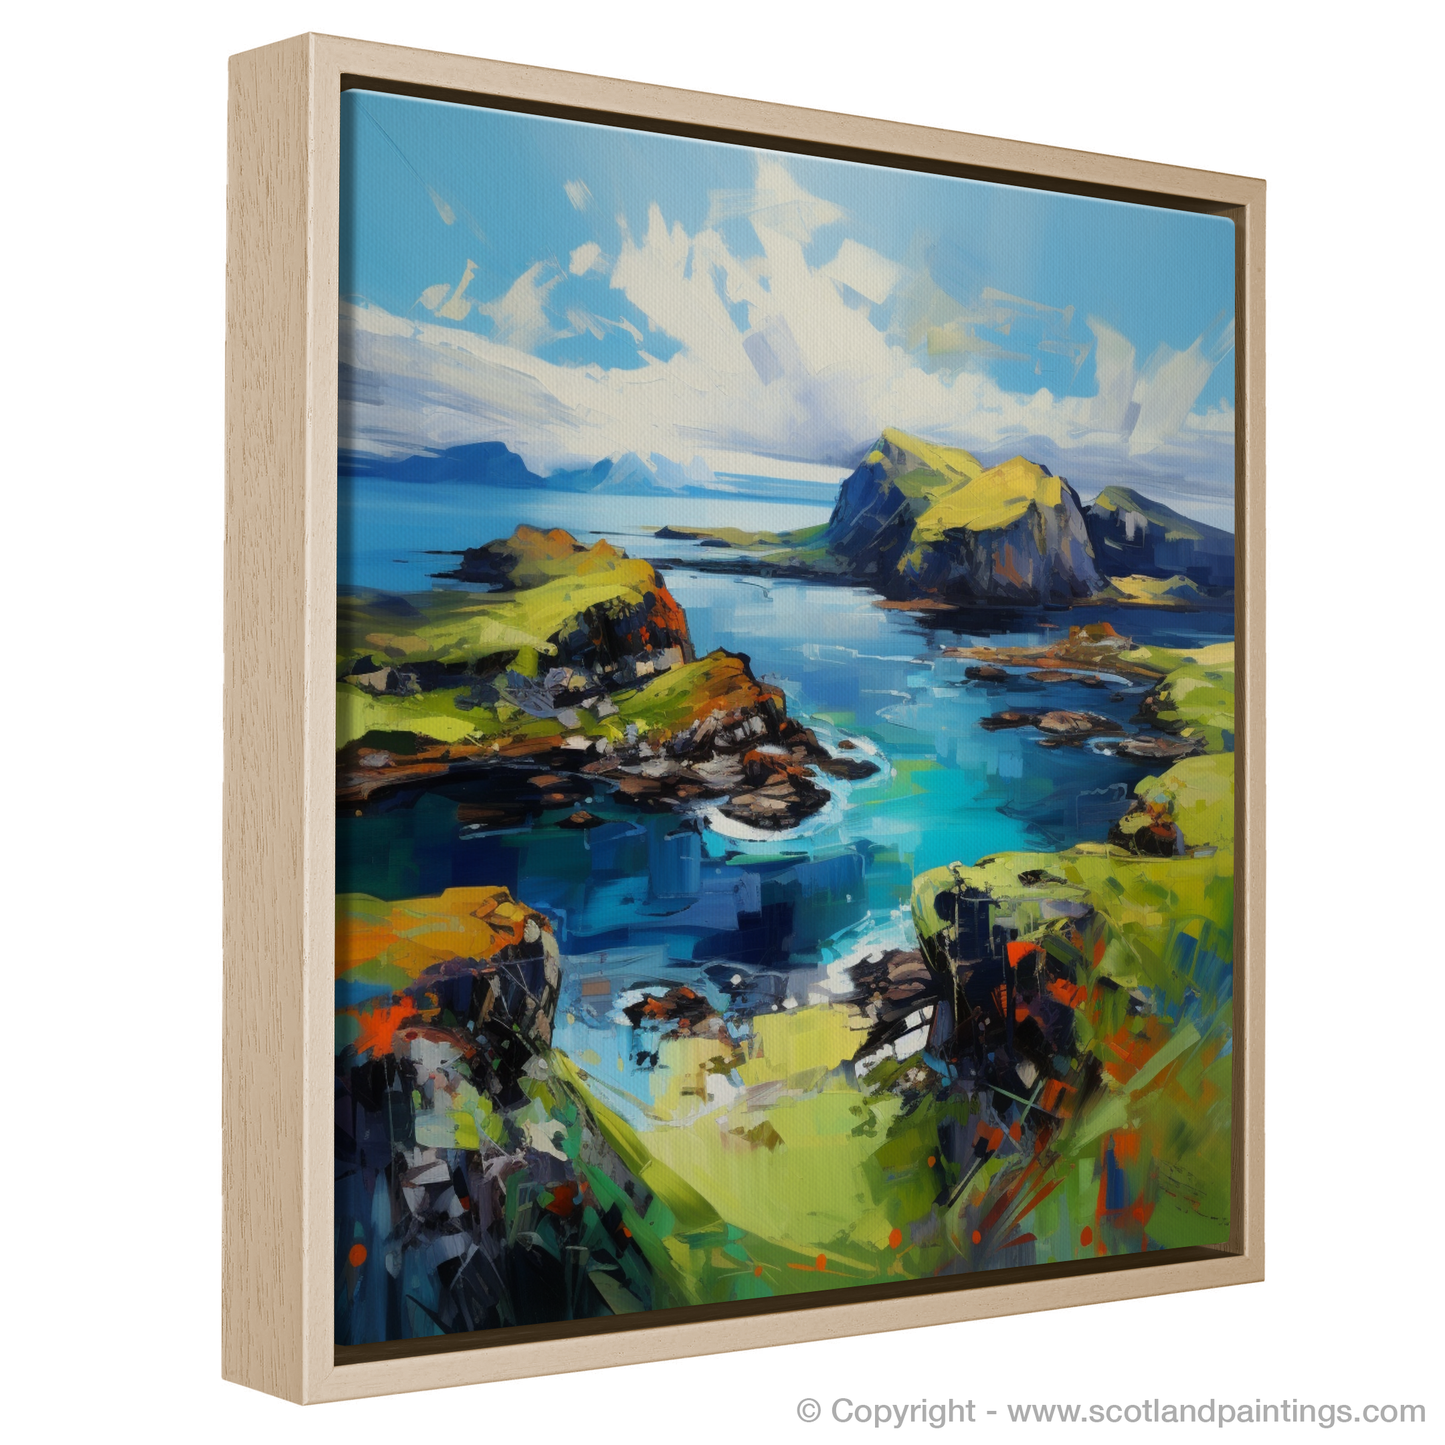 Painting and Art Print of Isle of Skye's smaller isles, Inner Hebrides entitled "Hebridean Wilds: An Expressionist Ode to Isle of Skye's Isles".